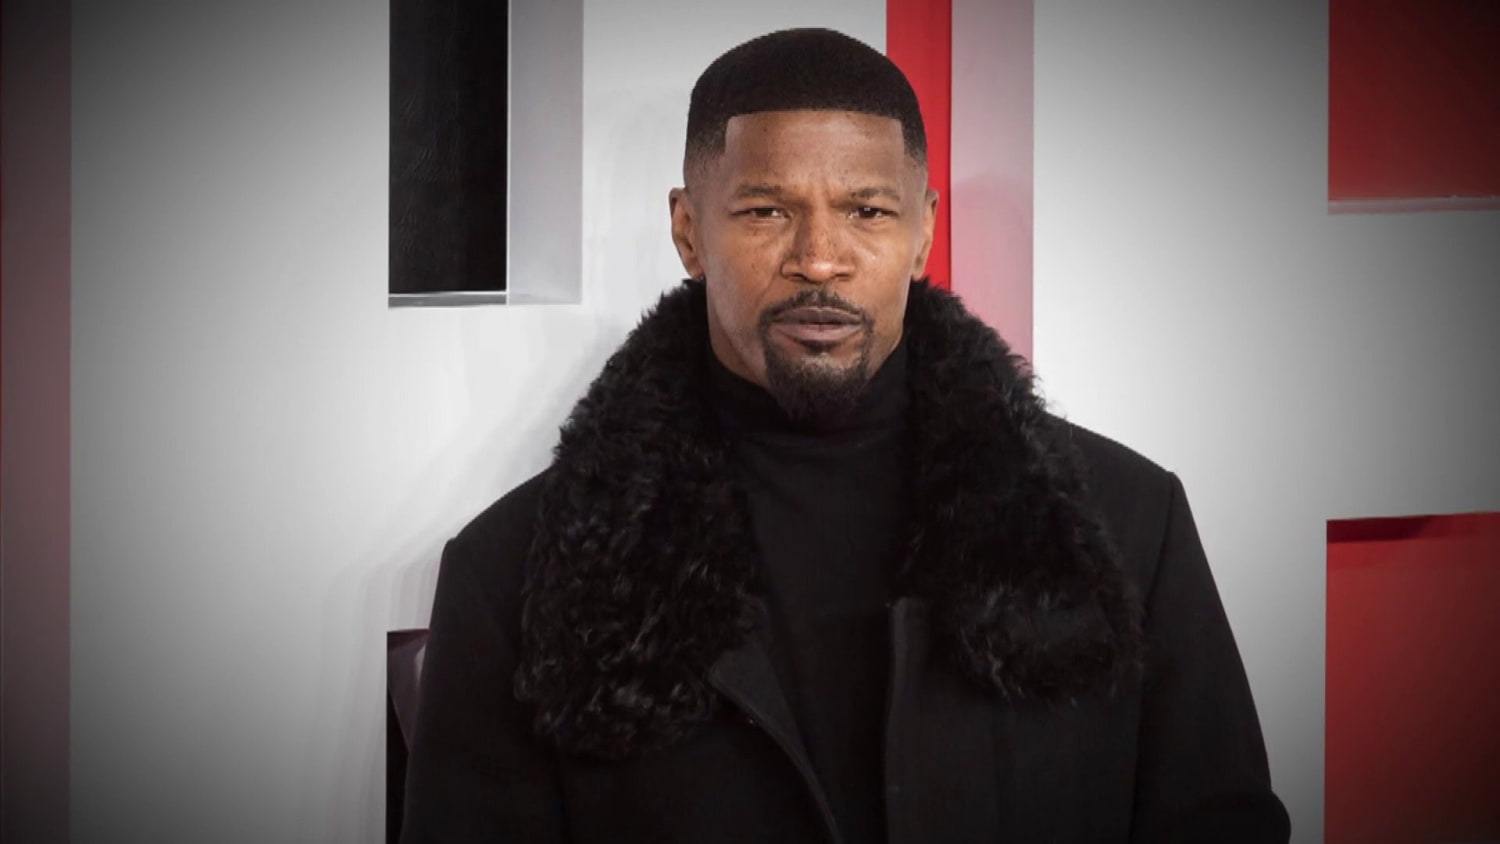 Jamie Foxx opens up about mystery illness for the first time